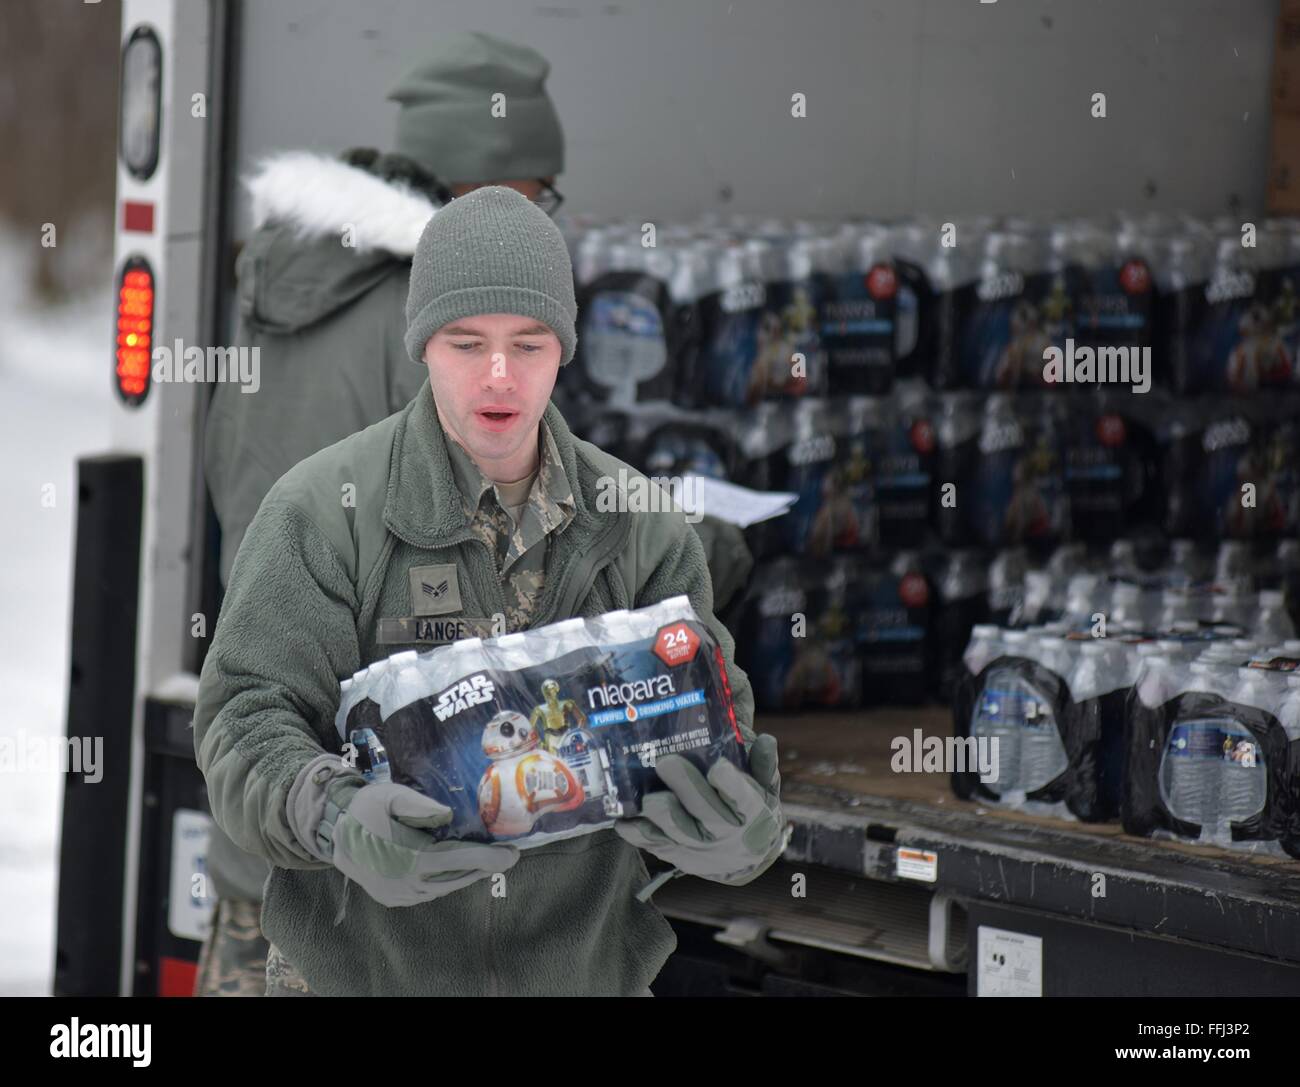 U.S Air Force airmen with the Michigan National Air Guard unload bottled water for distribution to residents effected by lead contamination in the city drinking water January 21, 2016 in Flint, Michigan. As many as 12,000 children have been exposed to dangerous drinking water after the state government switched water supplies without complying with federal regulations on safety. Stock Photo